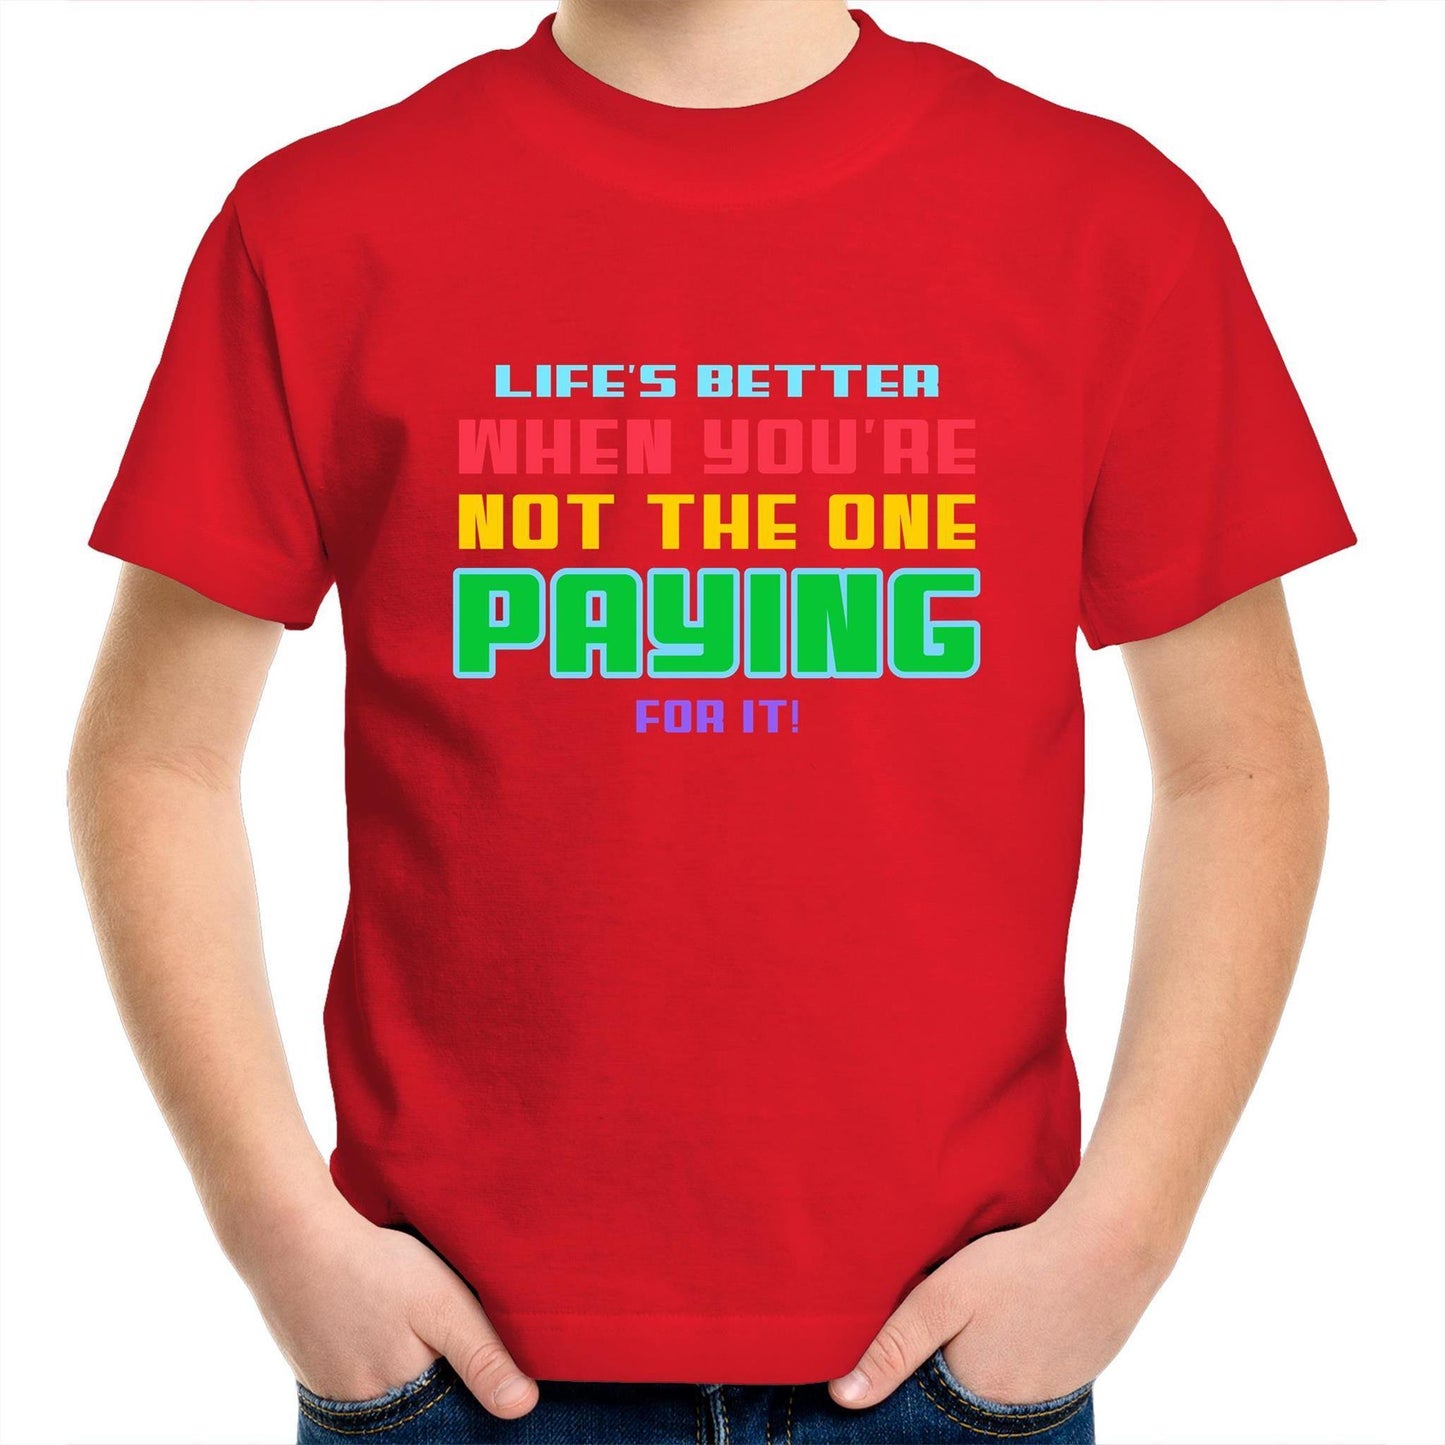 Life's Better - Kids Youth Crew T-Shirt Red Kids Youth T-shirt